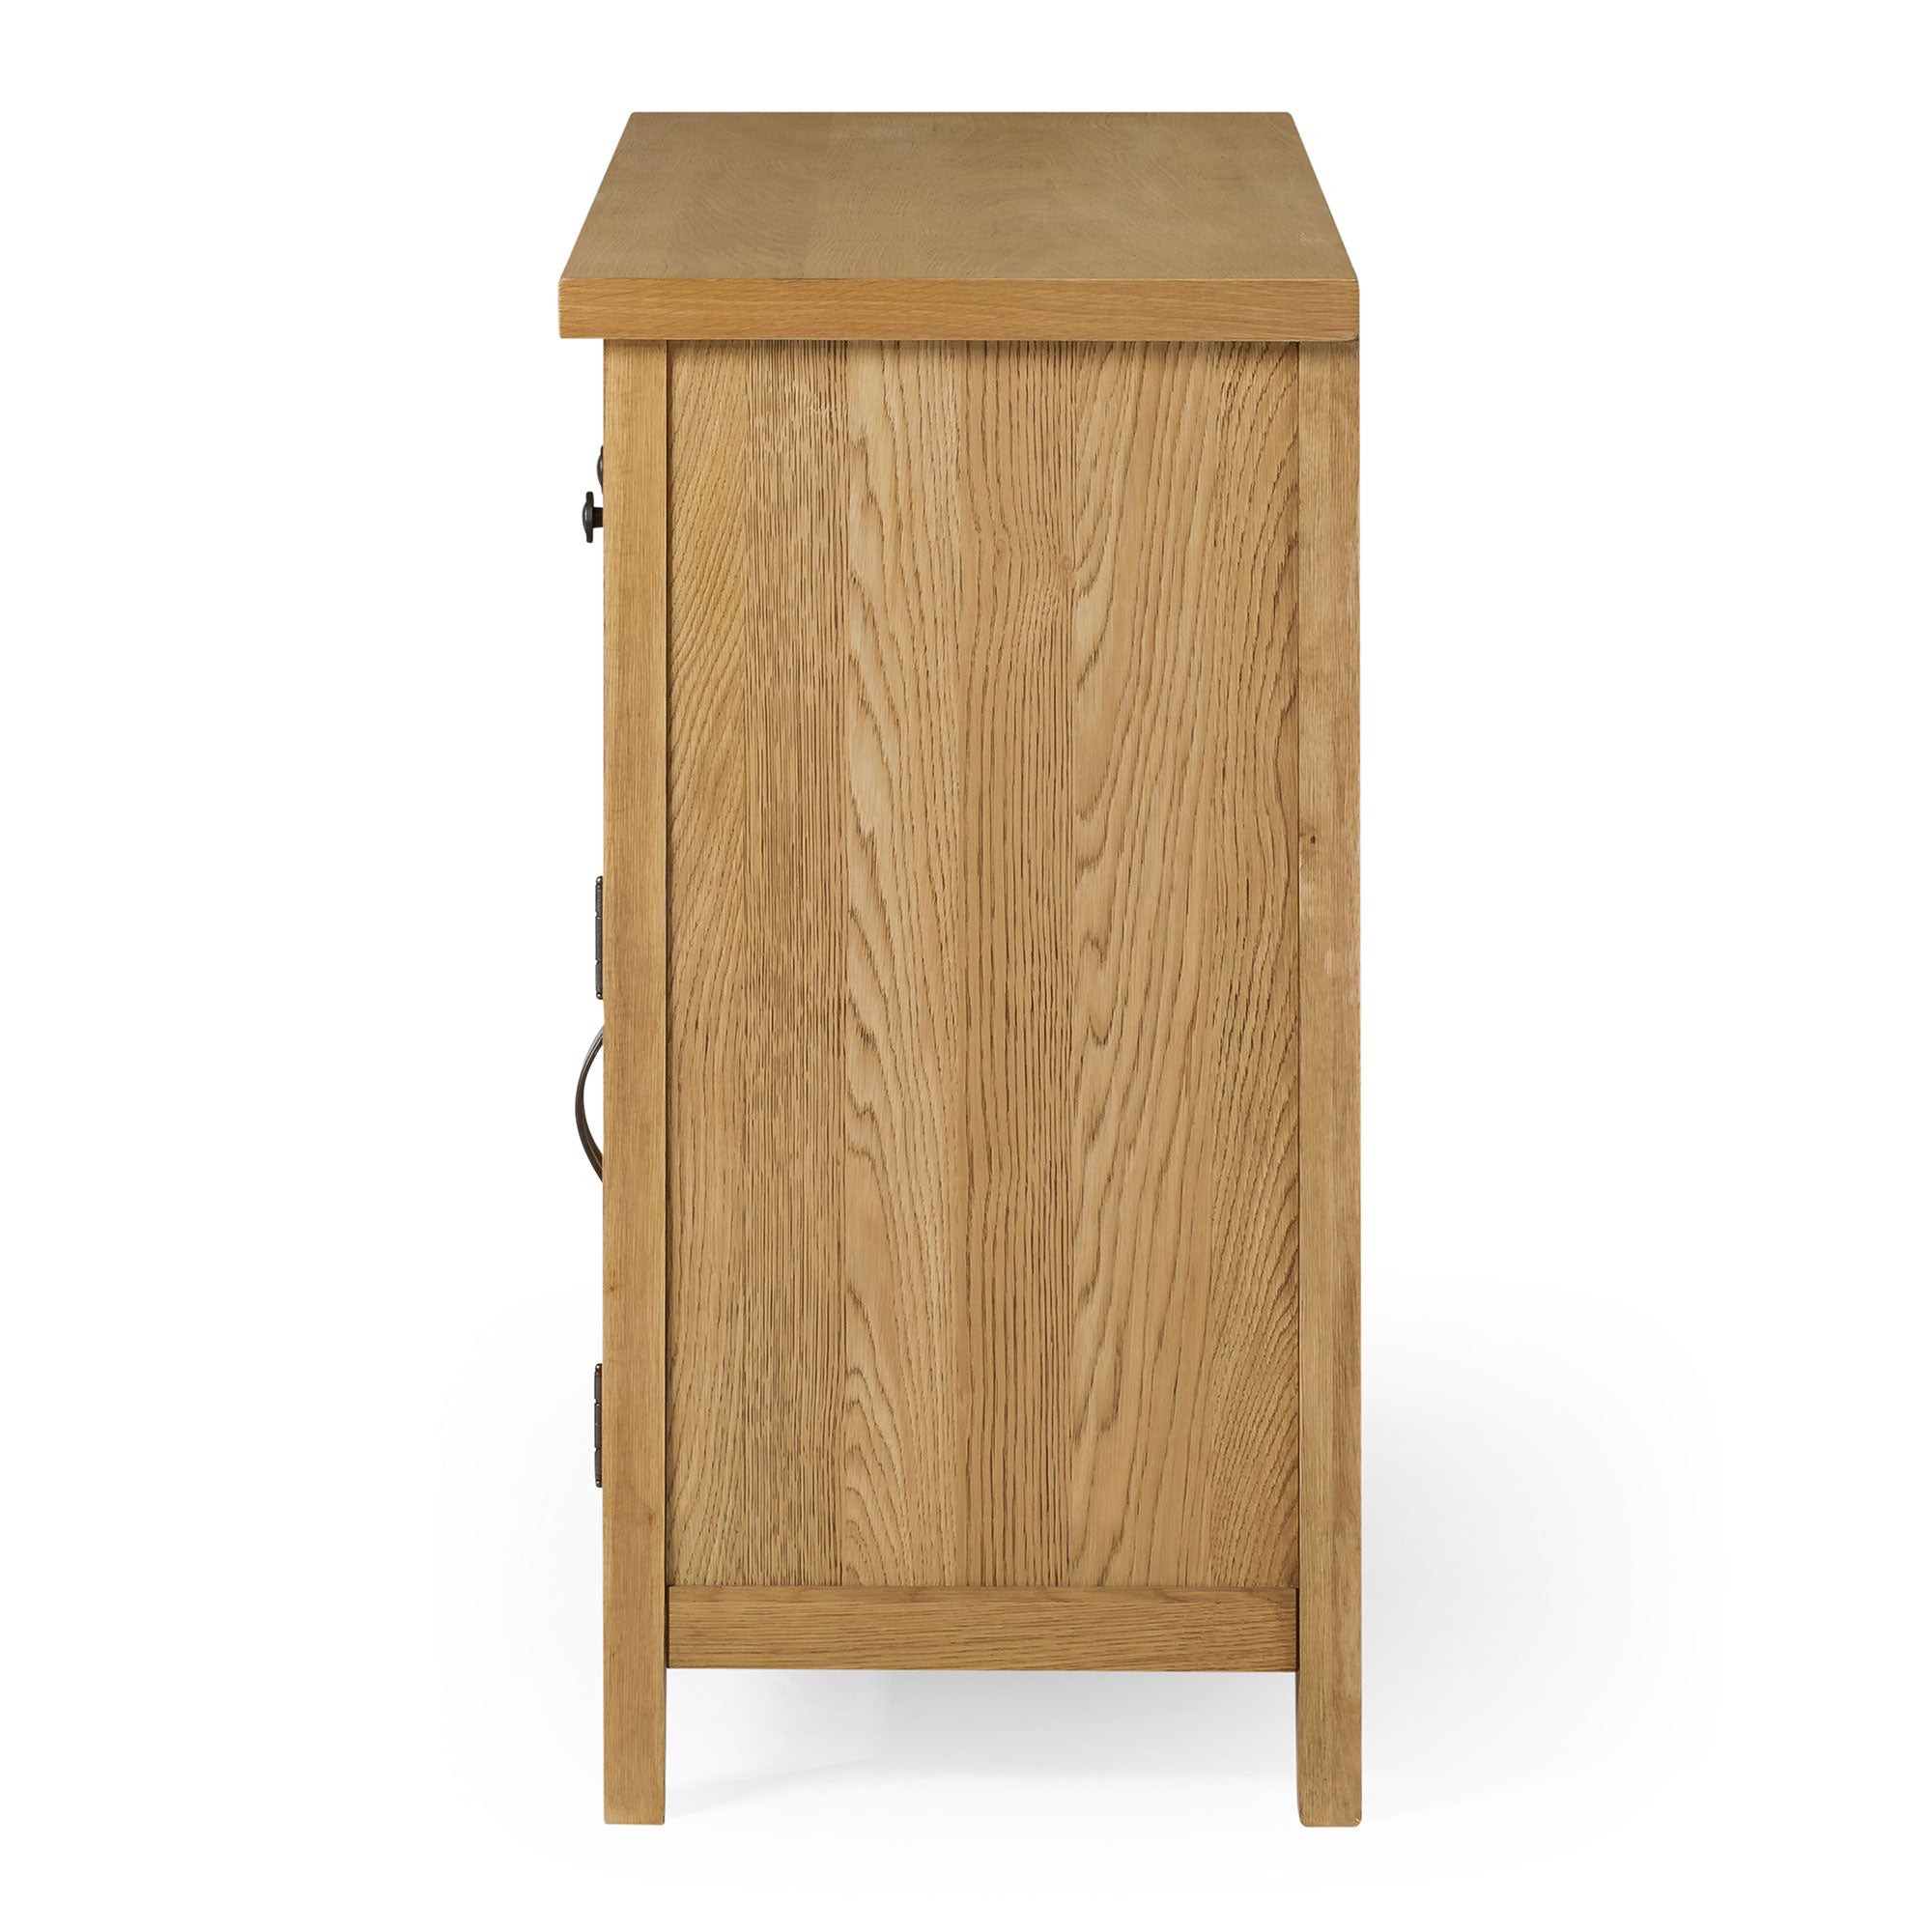 Felix Organic Wooden Sideboard in Weathered Natural Finish in Cabinets by Maven Lane